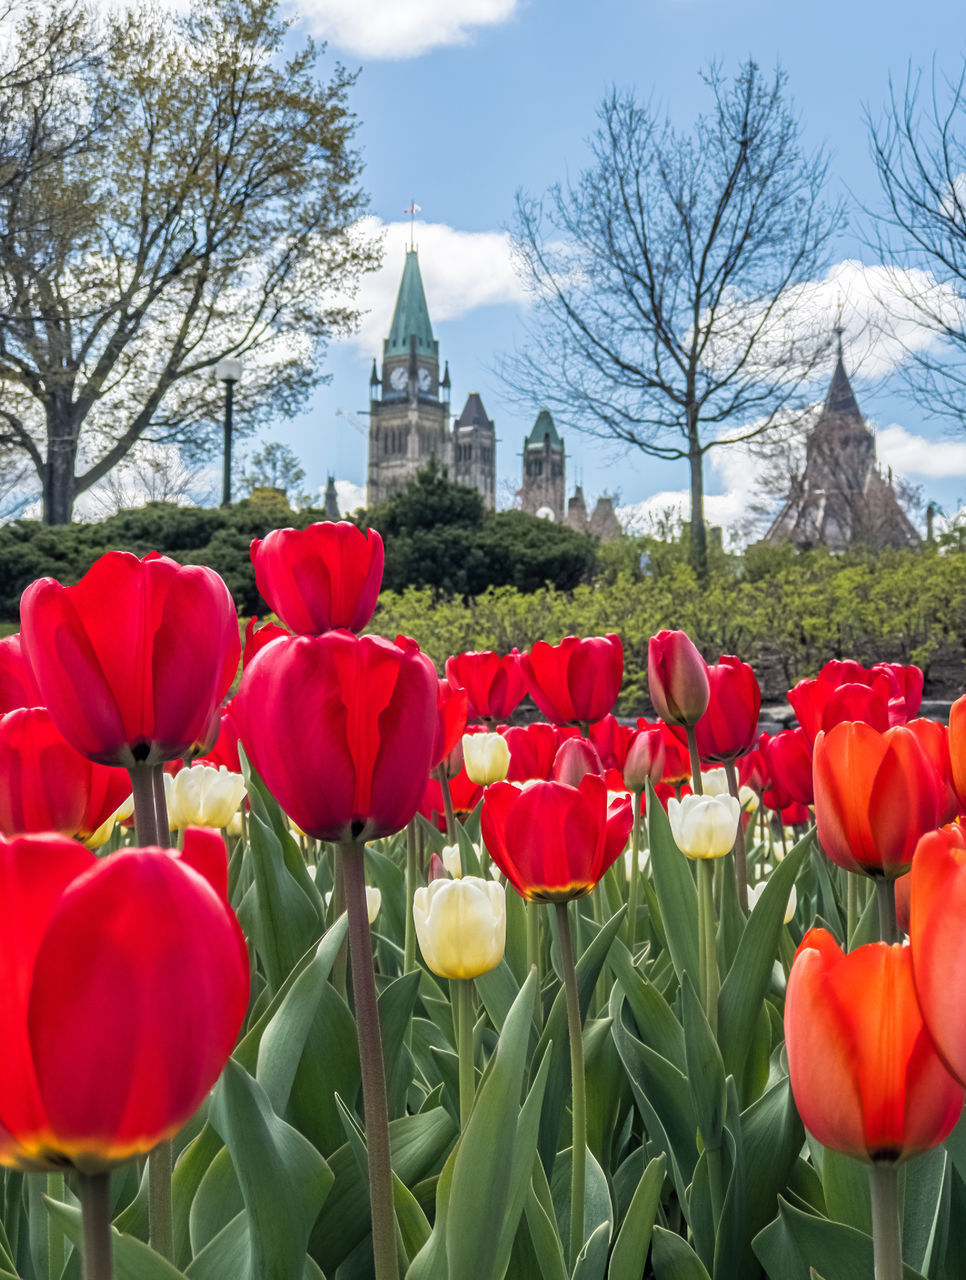 VIEW OF RED TULIPS AGAINST TEMPLE